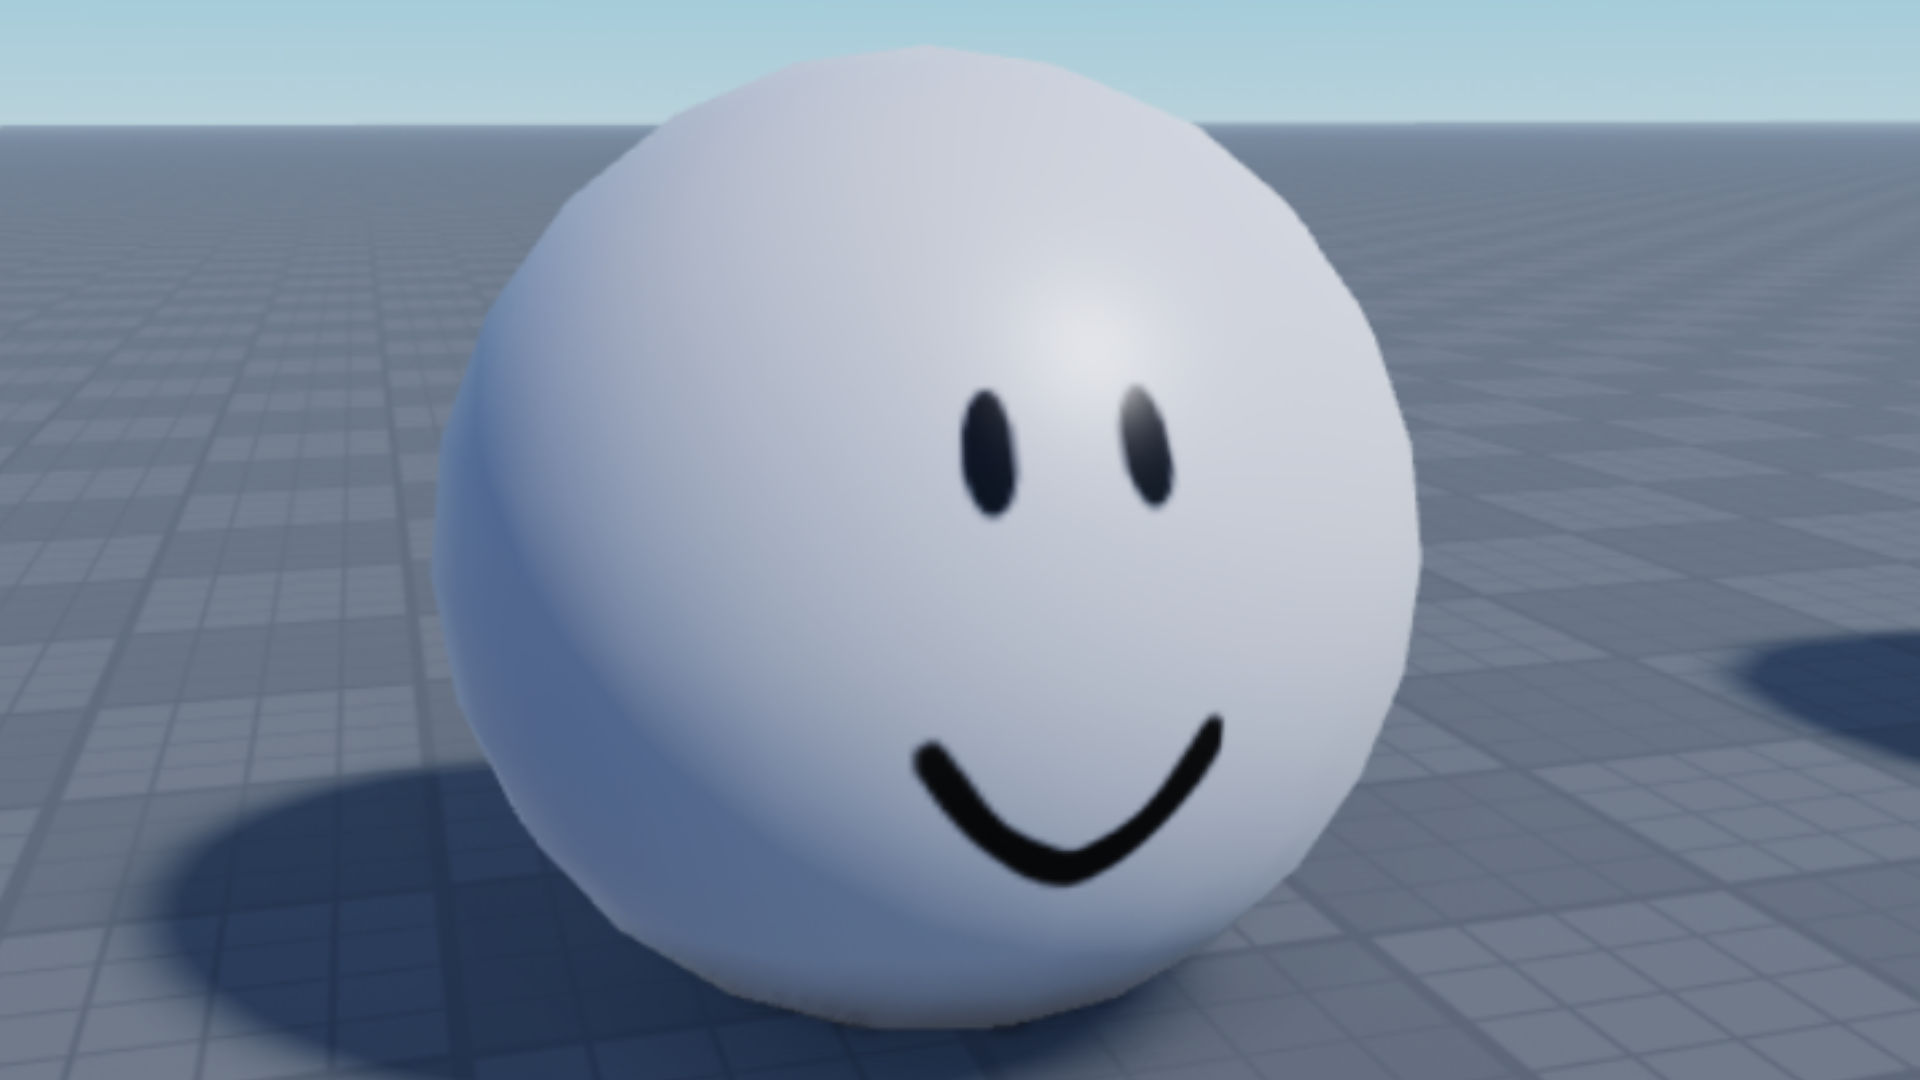 YOU CAN CREATE YOUR OWN ROBLOX FACES 💀 